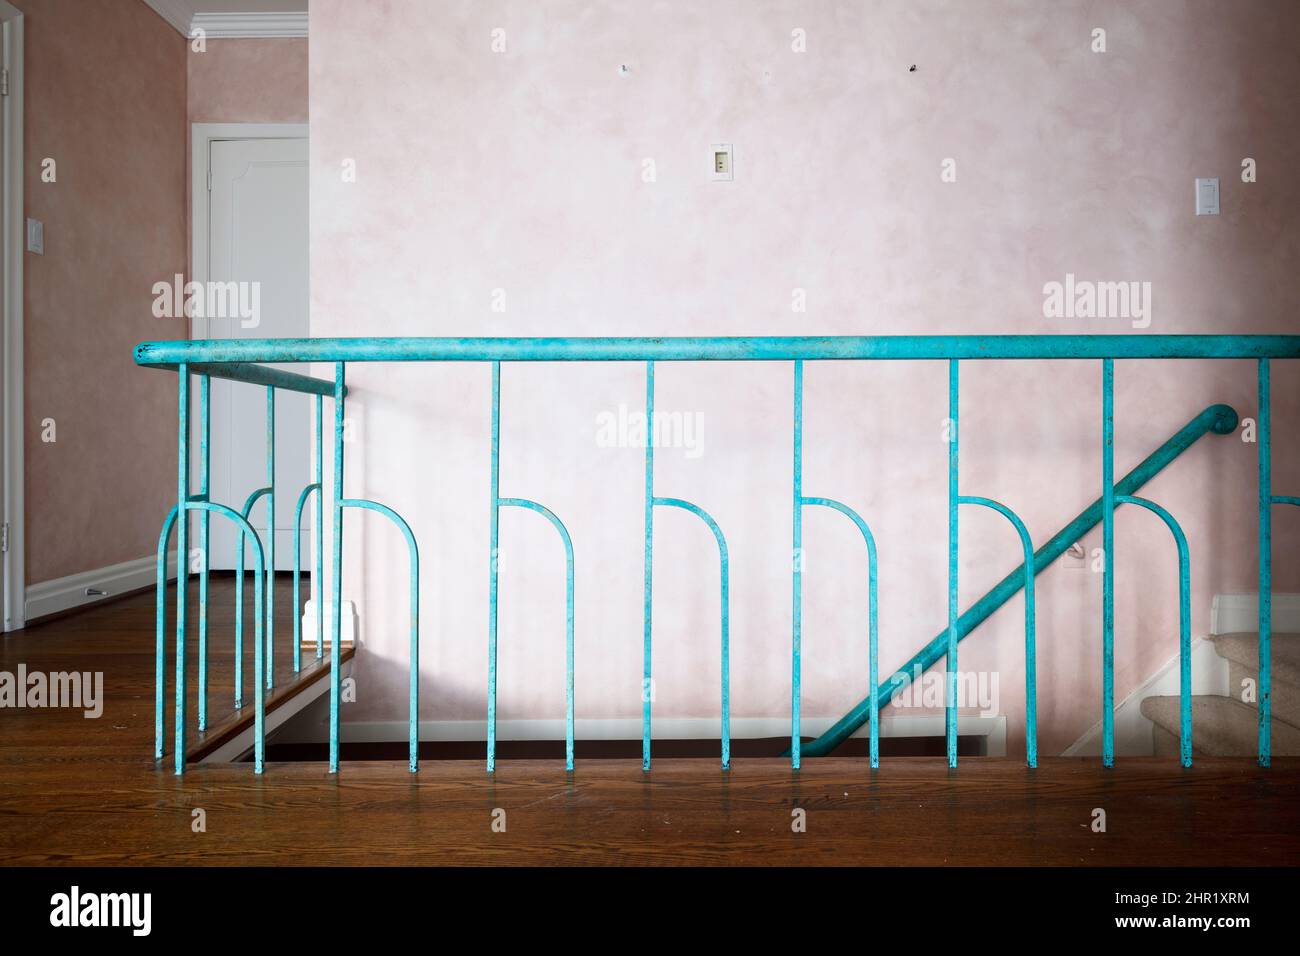 A wooden staicase railing with decorative metal spindles painted turquoise in a mid century build home.  This house has been demolished. Stock Photo